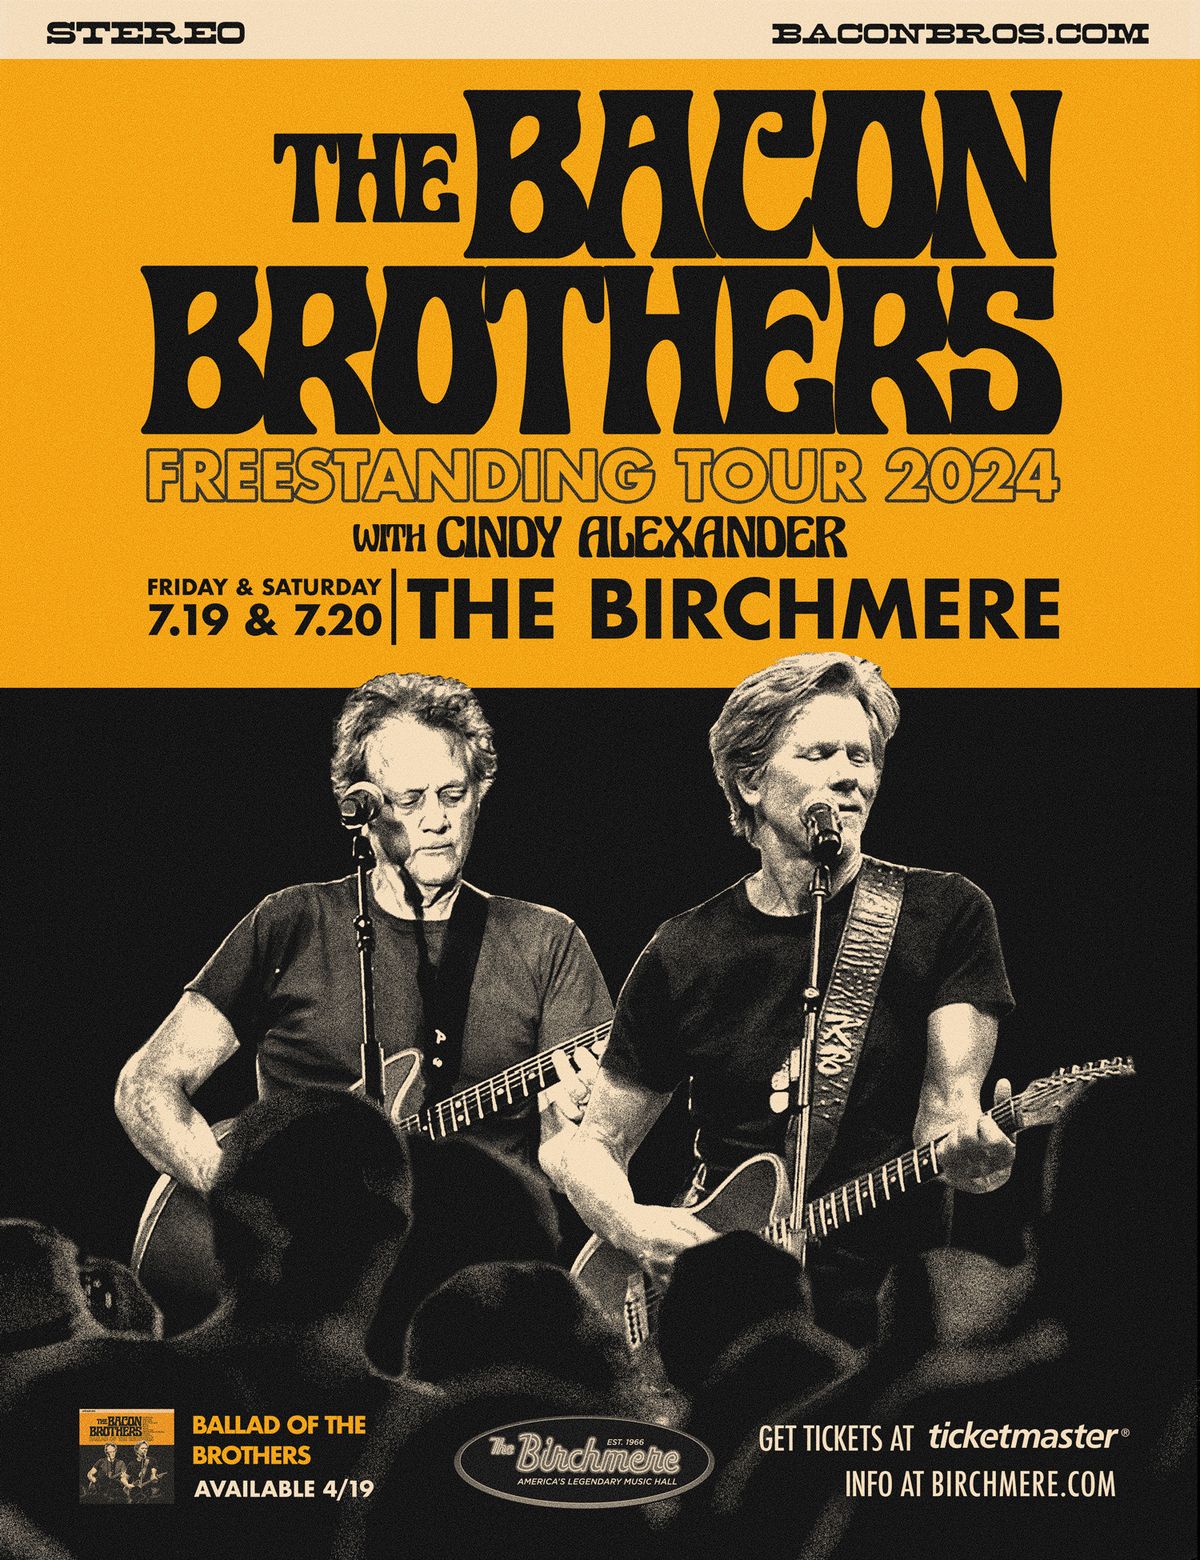 SOLD OUT! The Bacon Brothers Freestanding Tour with Cindy Alexander